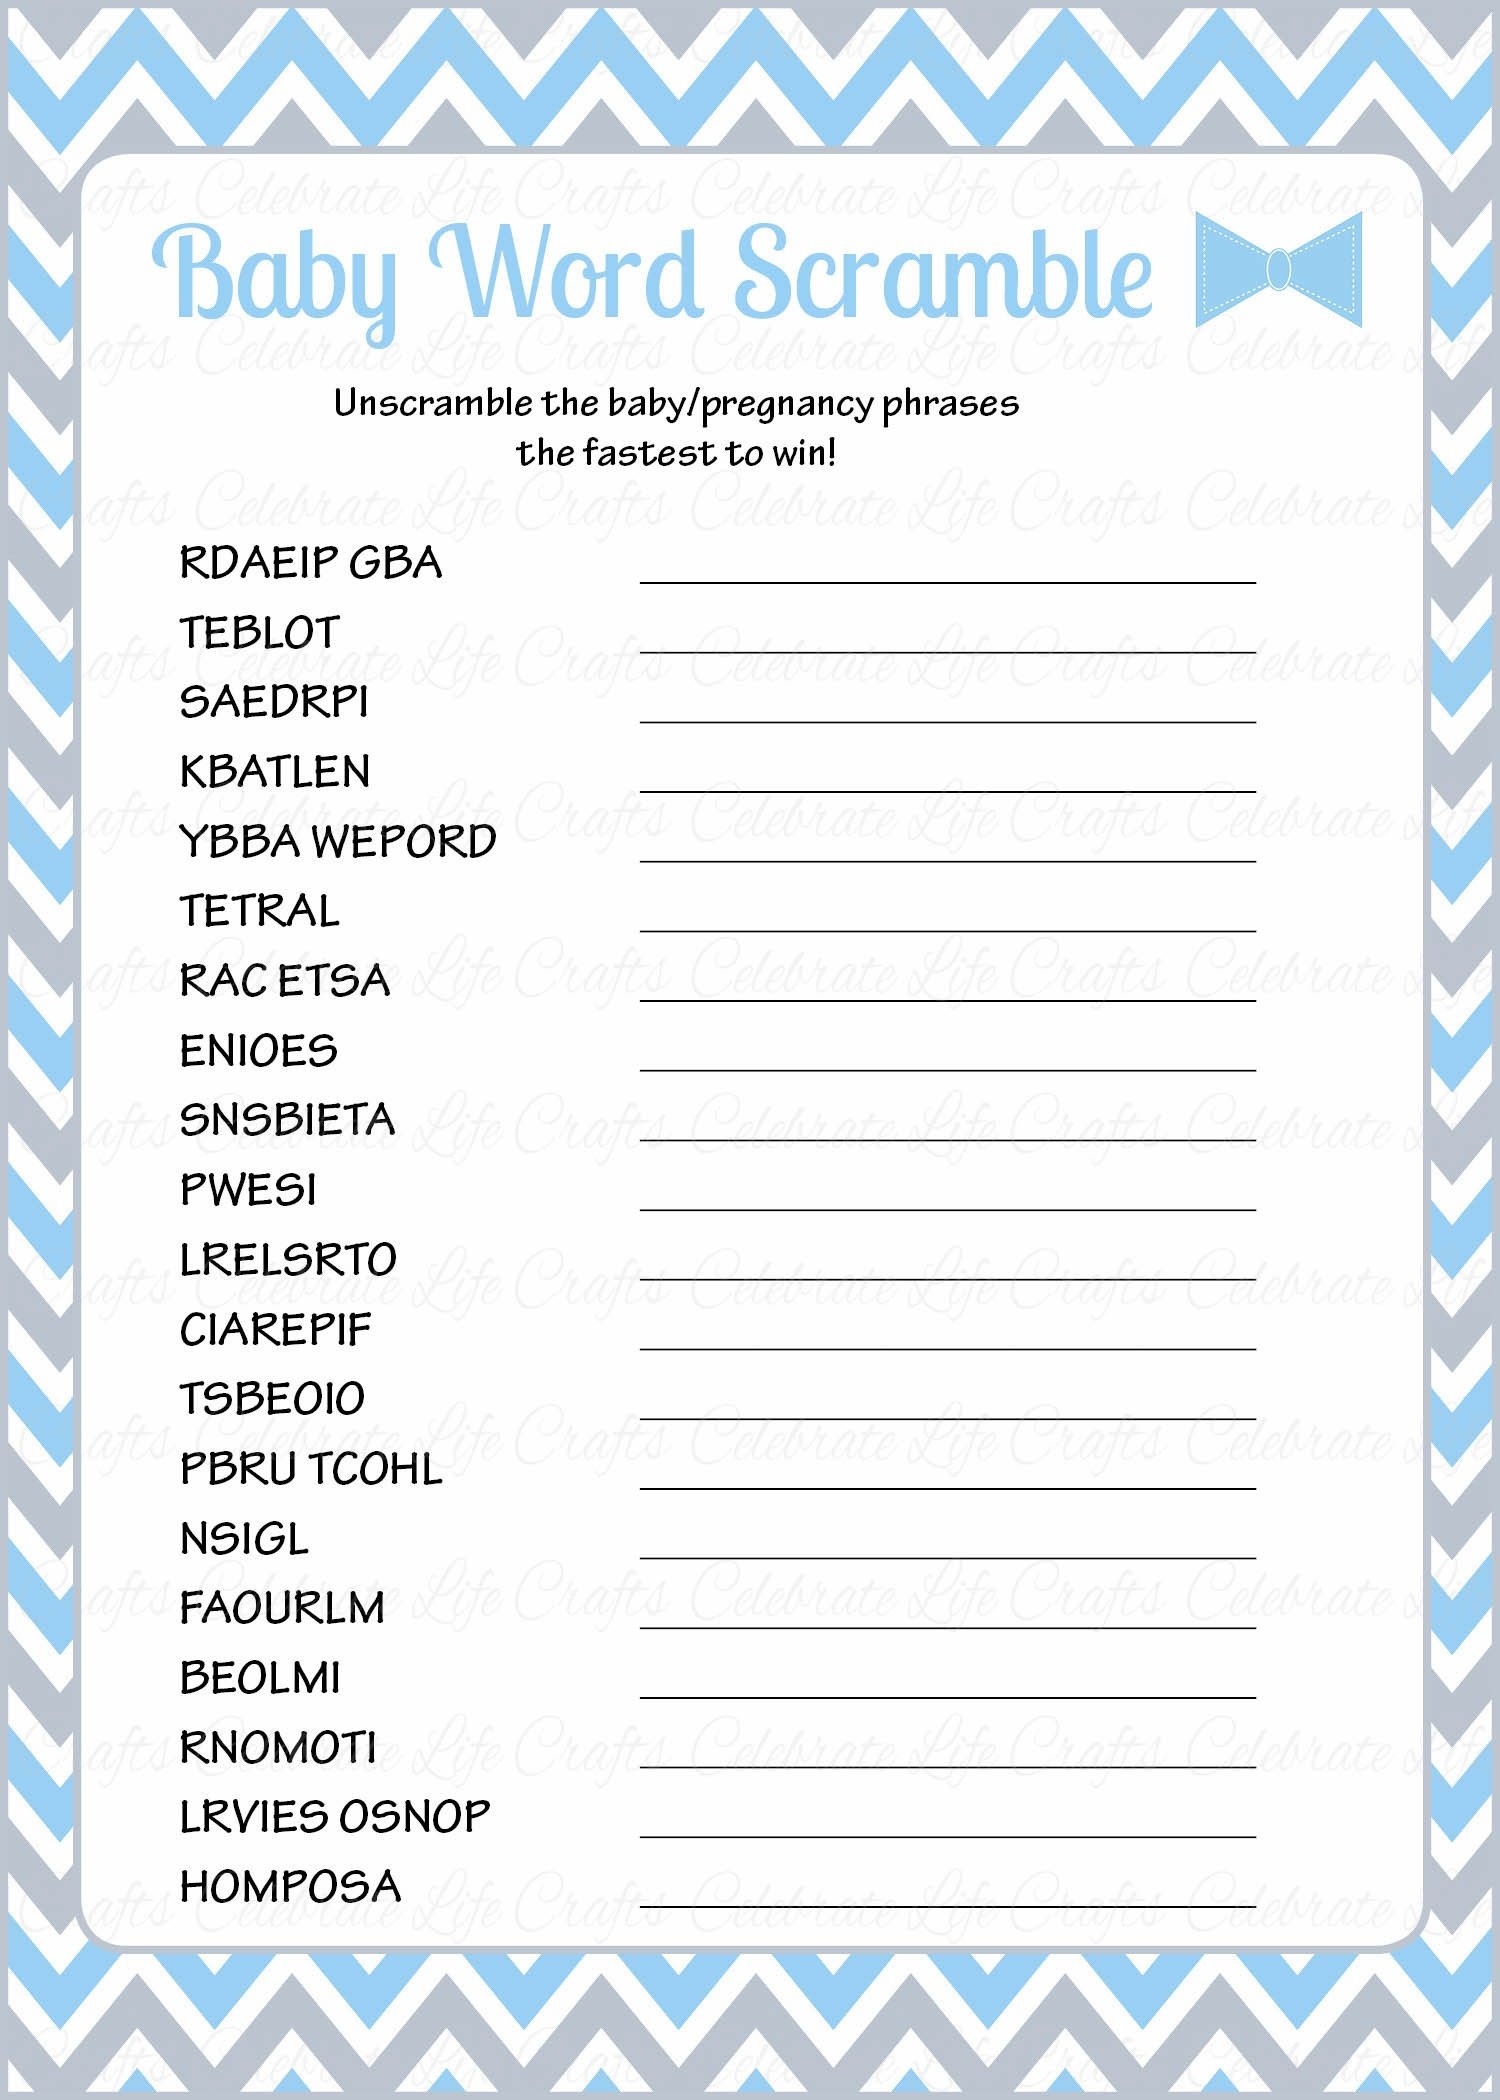 36 Adorable Baby Shower Word Scrambles | Kittybabylove - Free Printable Baby Shower Word Scramble